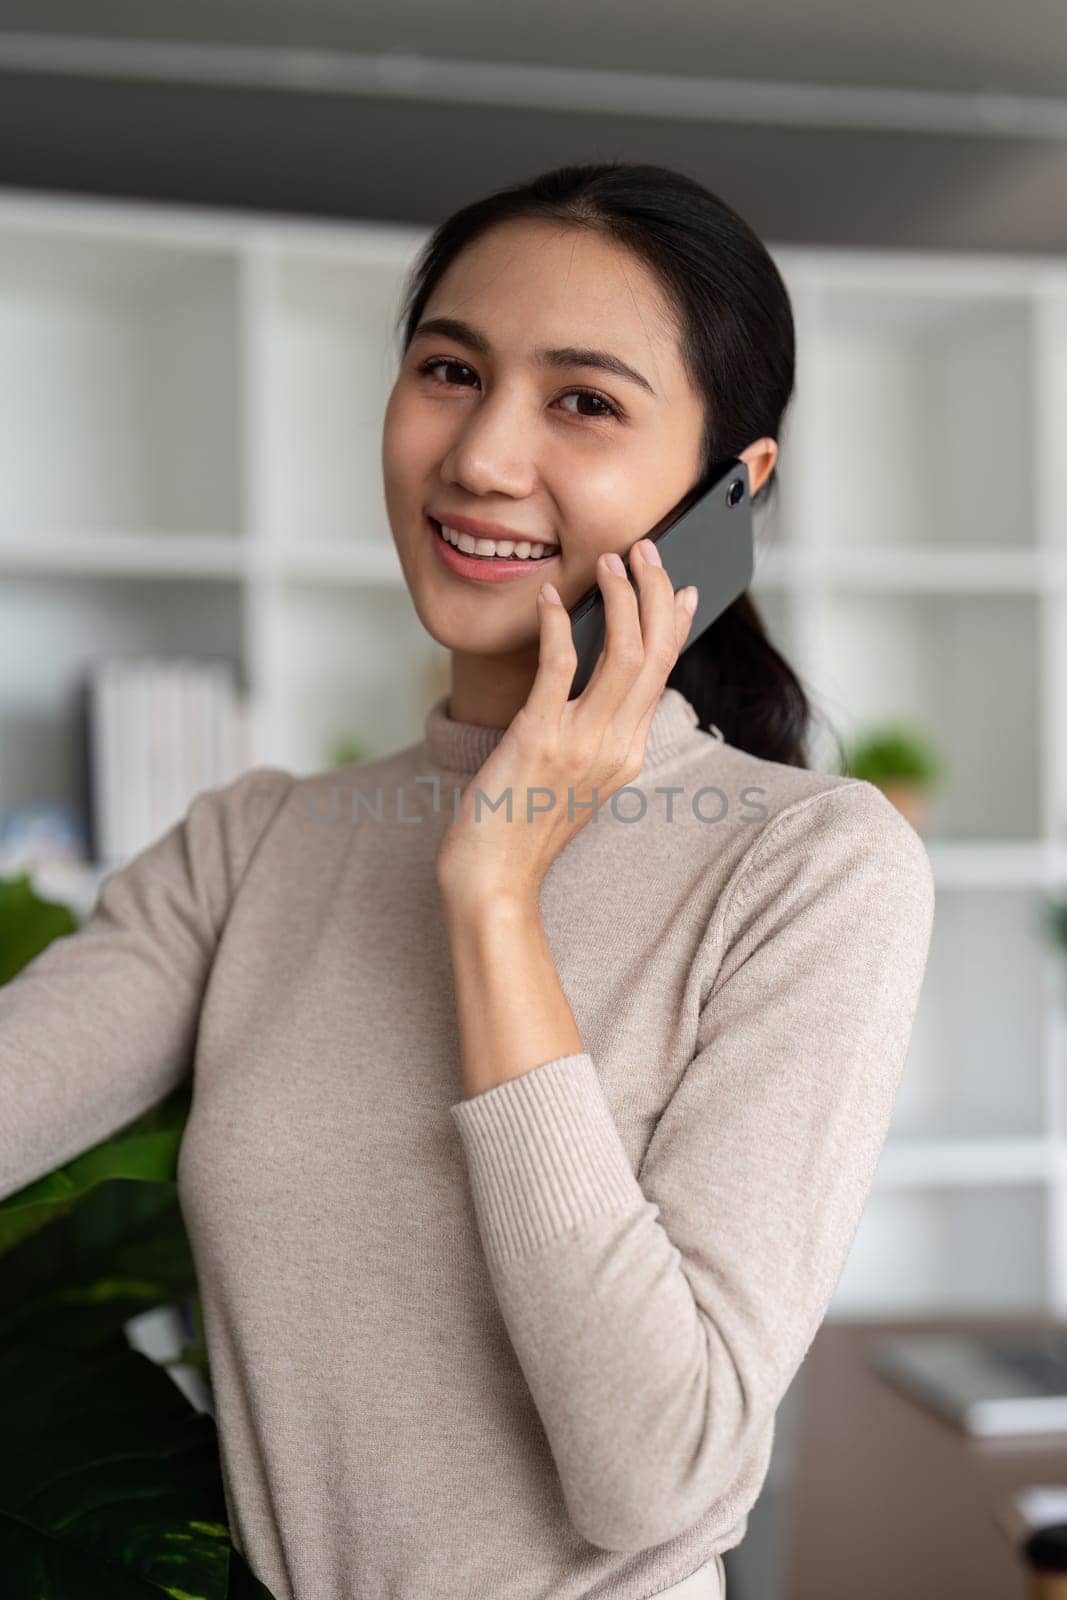 Successful businesswoman speaking by smartphone and smiling happily while standing in office.